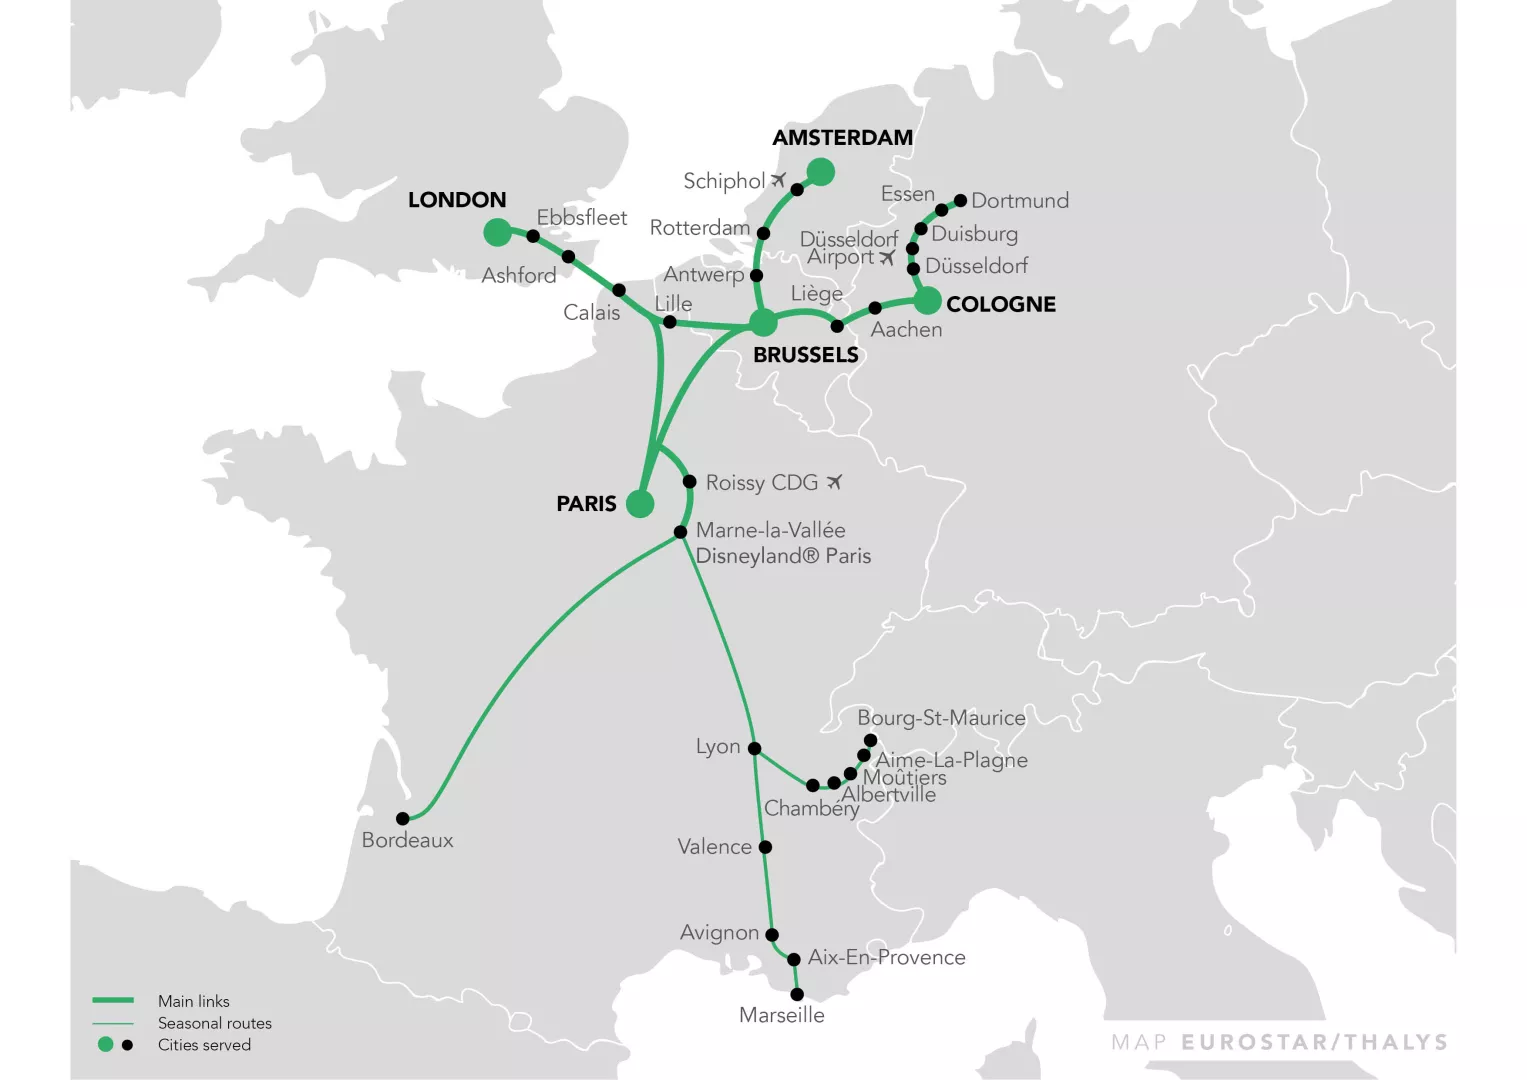 COMBINED EUROSTAR AND THALYS NETWORK